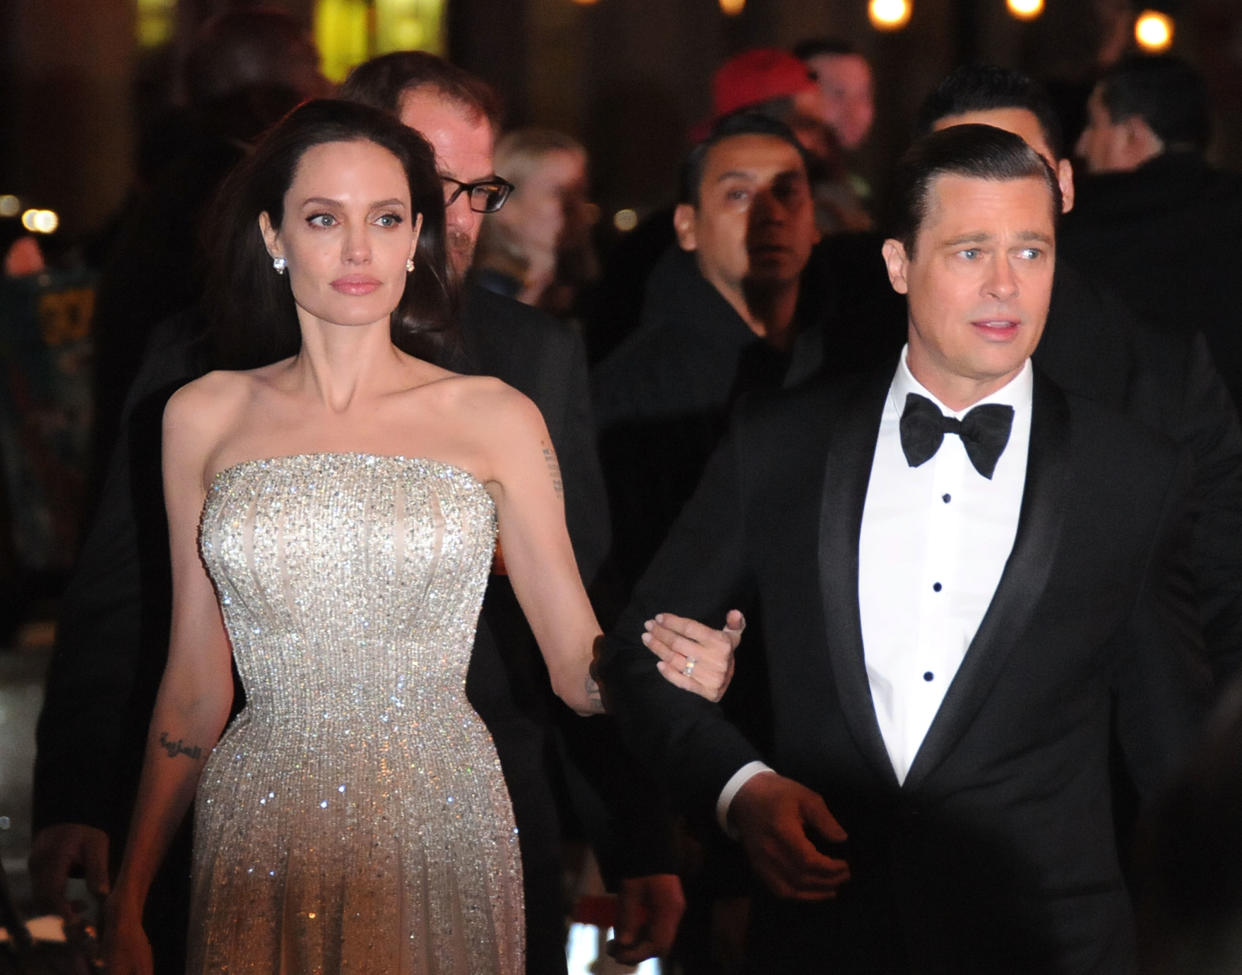 Angelina Jolie and Brad Pitt arrive at the AFI premiere of <em>By the Sea</em> on Nov. 5, 2015, in Hollywood. (Photo: Barry King/Getty Images)